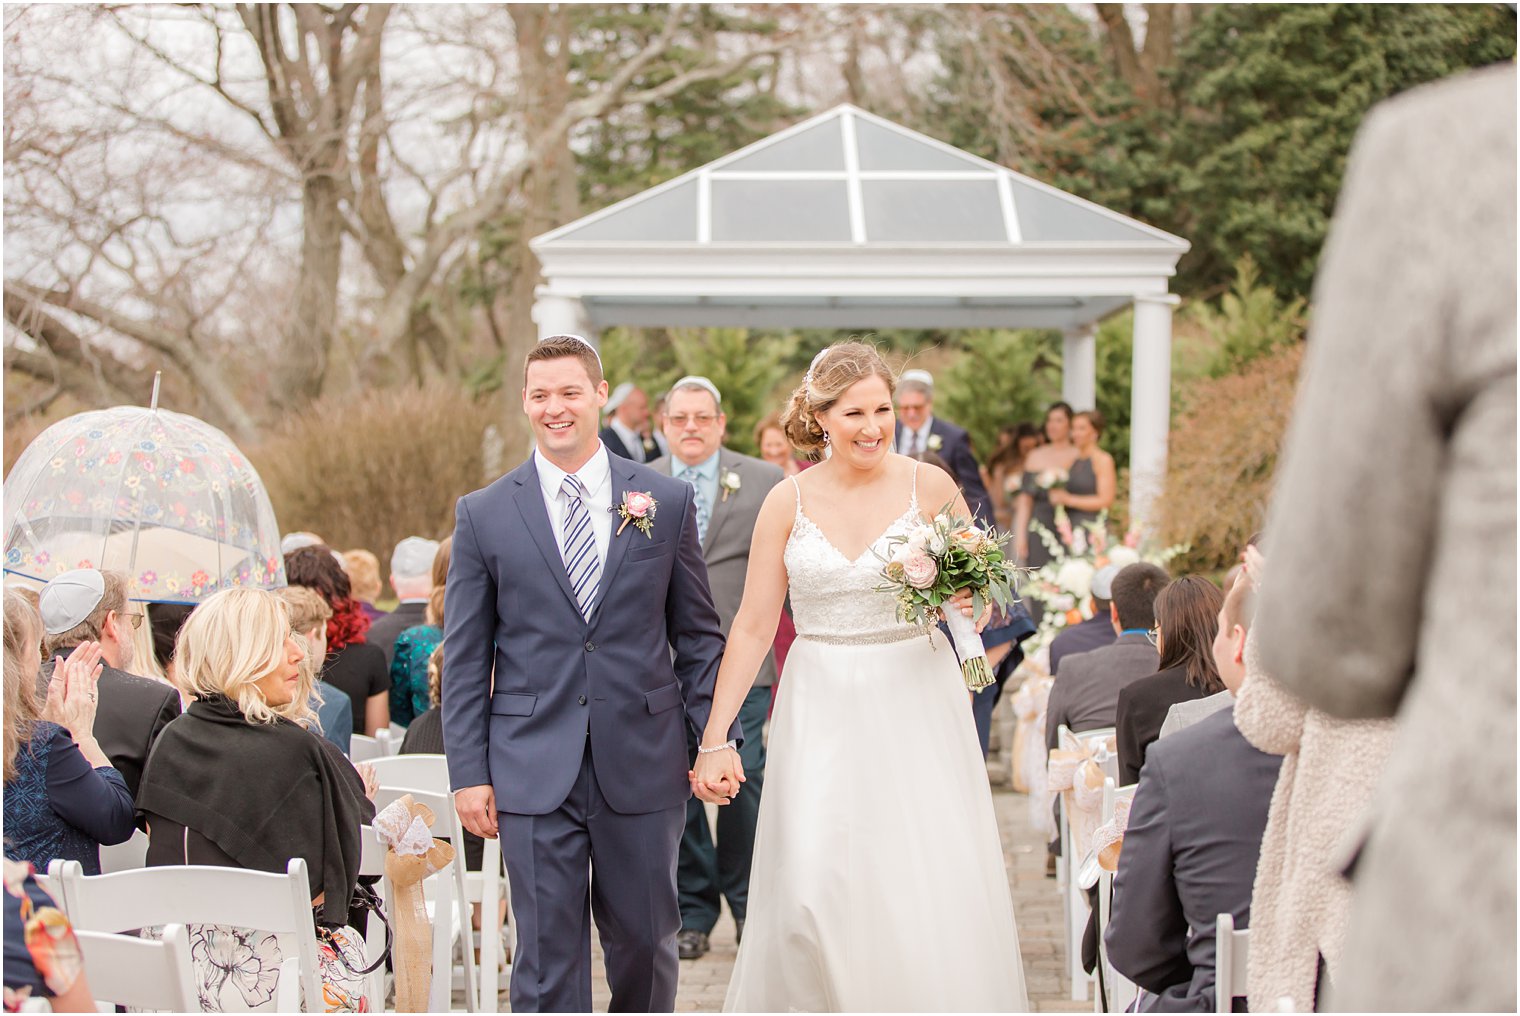 Wedding recessional at The Mill Lakeside Manor